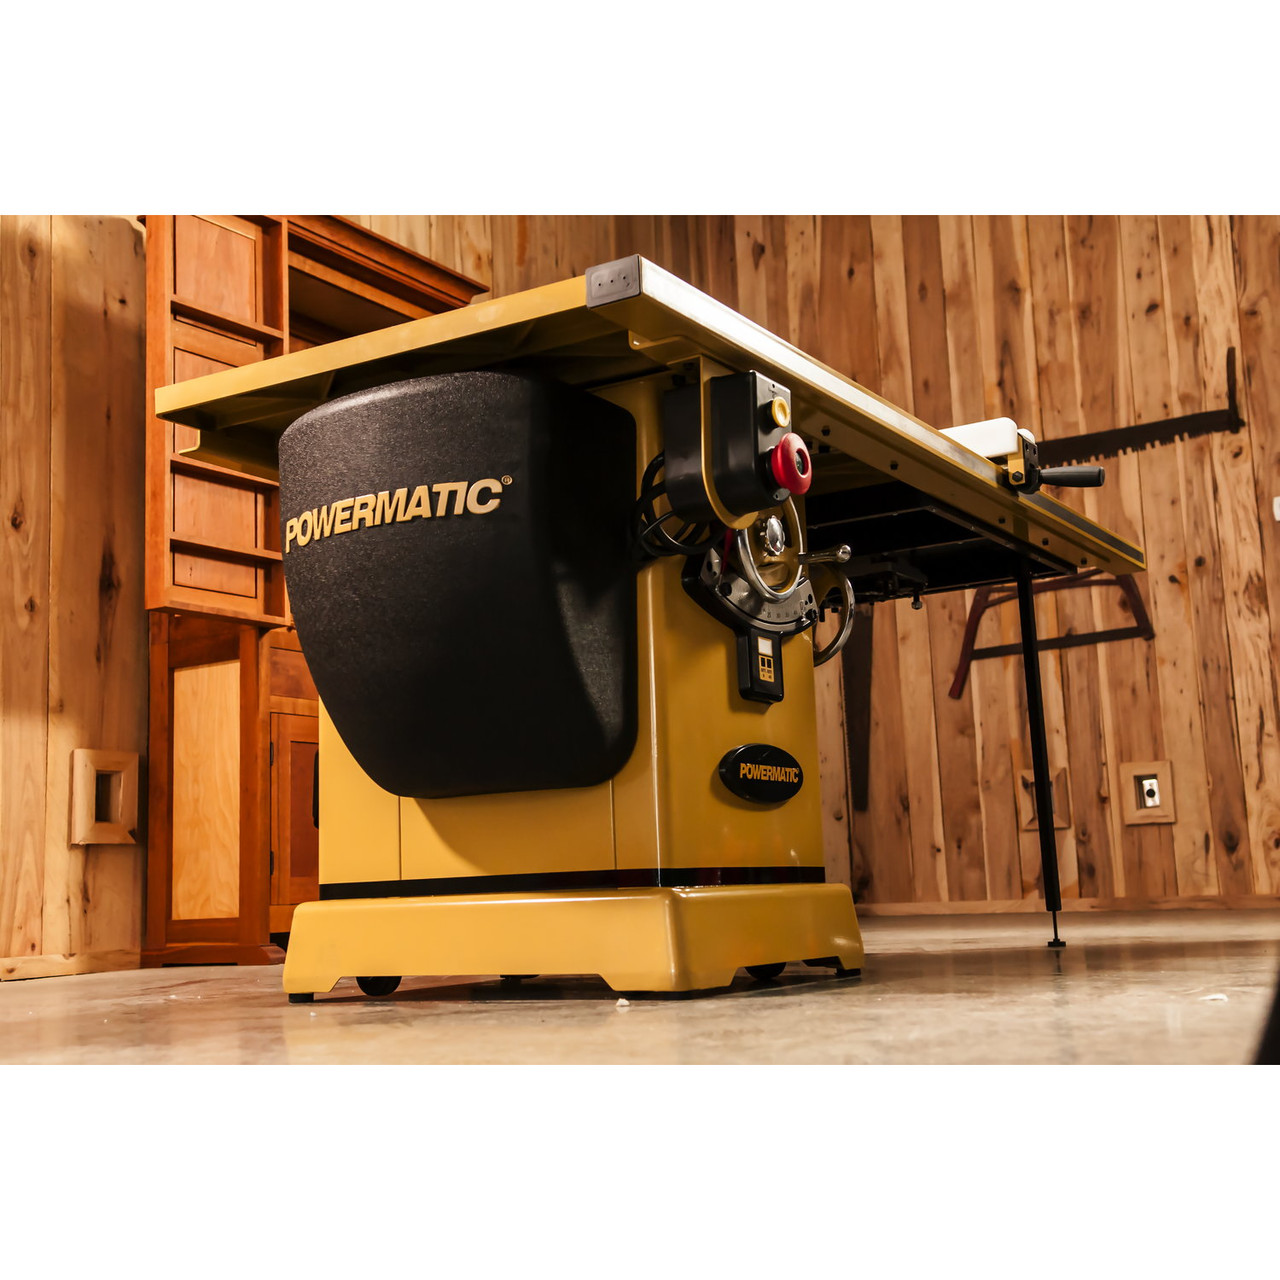 Powermatic, PM2000, 10" Tablesaw, 5HP, 3PH, 230/460V, 50" Accu-Fence System, Router Lift